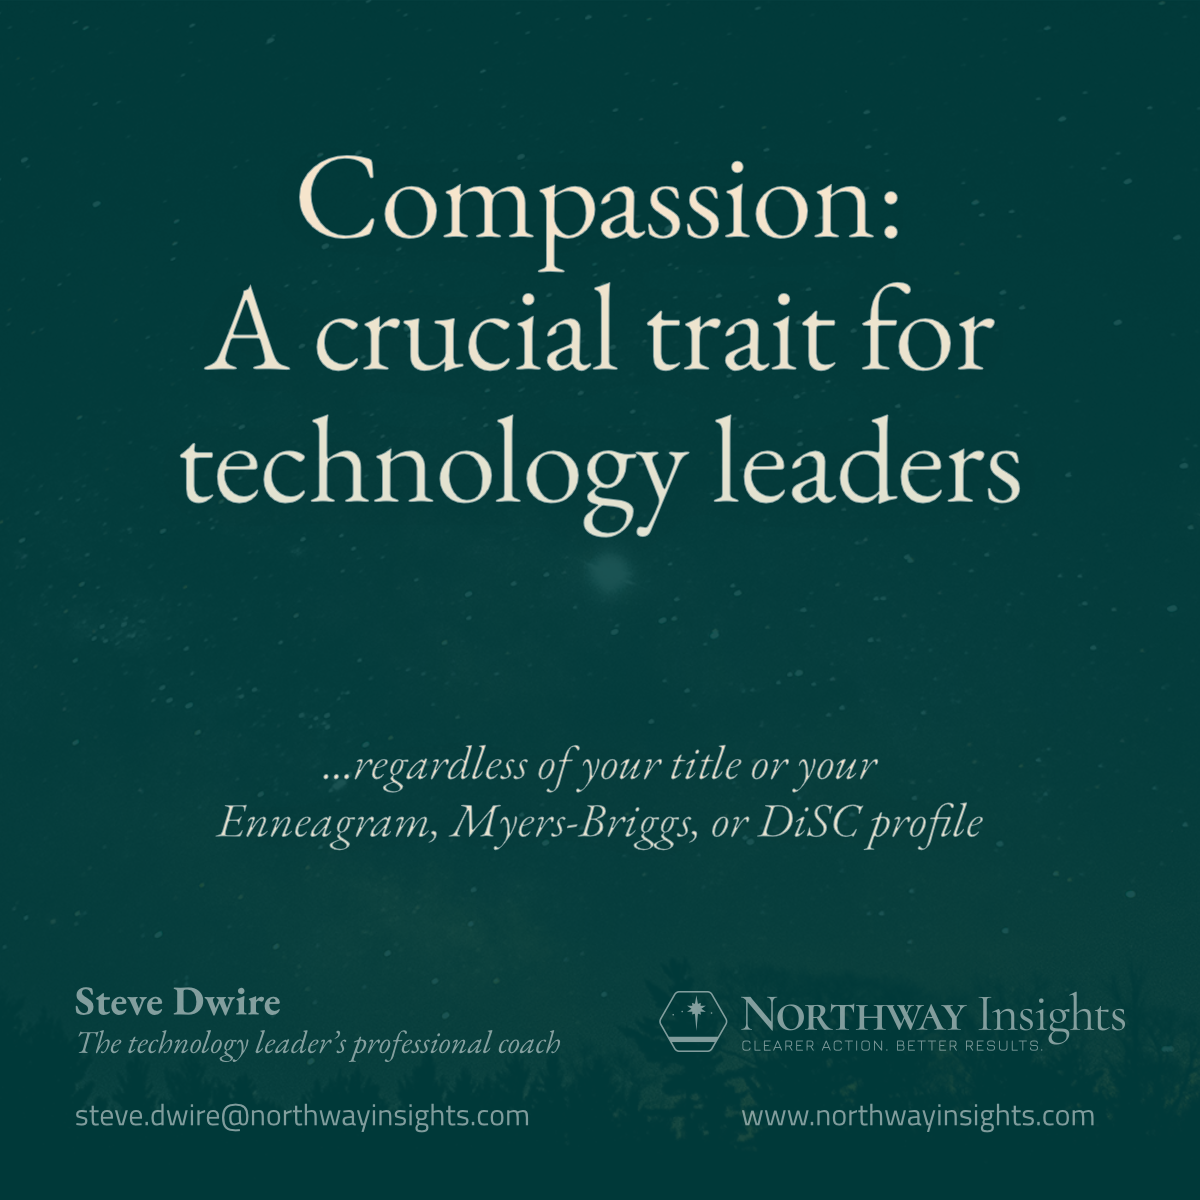 Compassion: A crucial trait for technology leaders